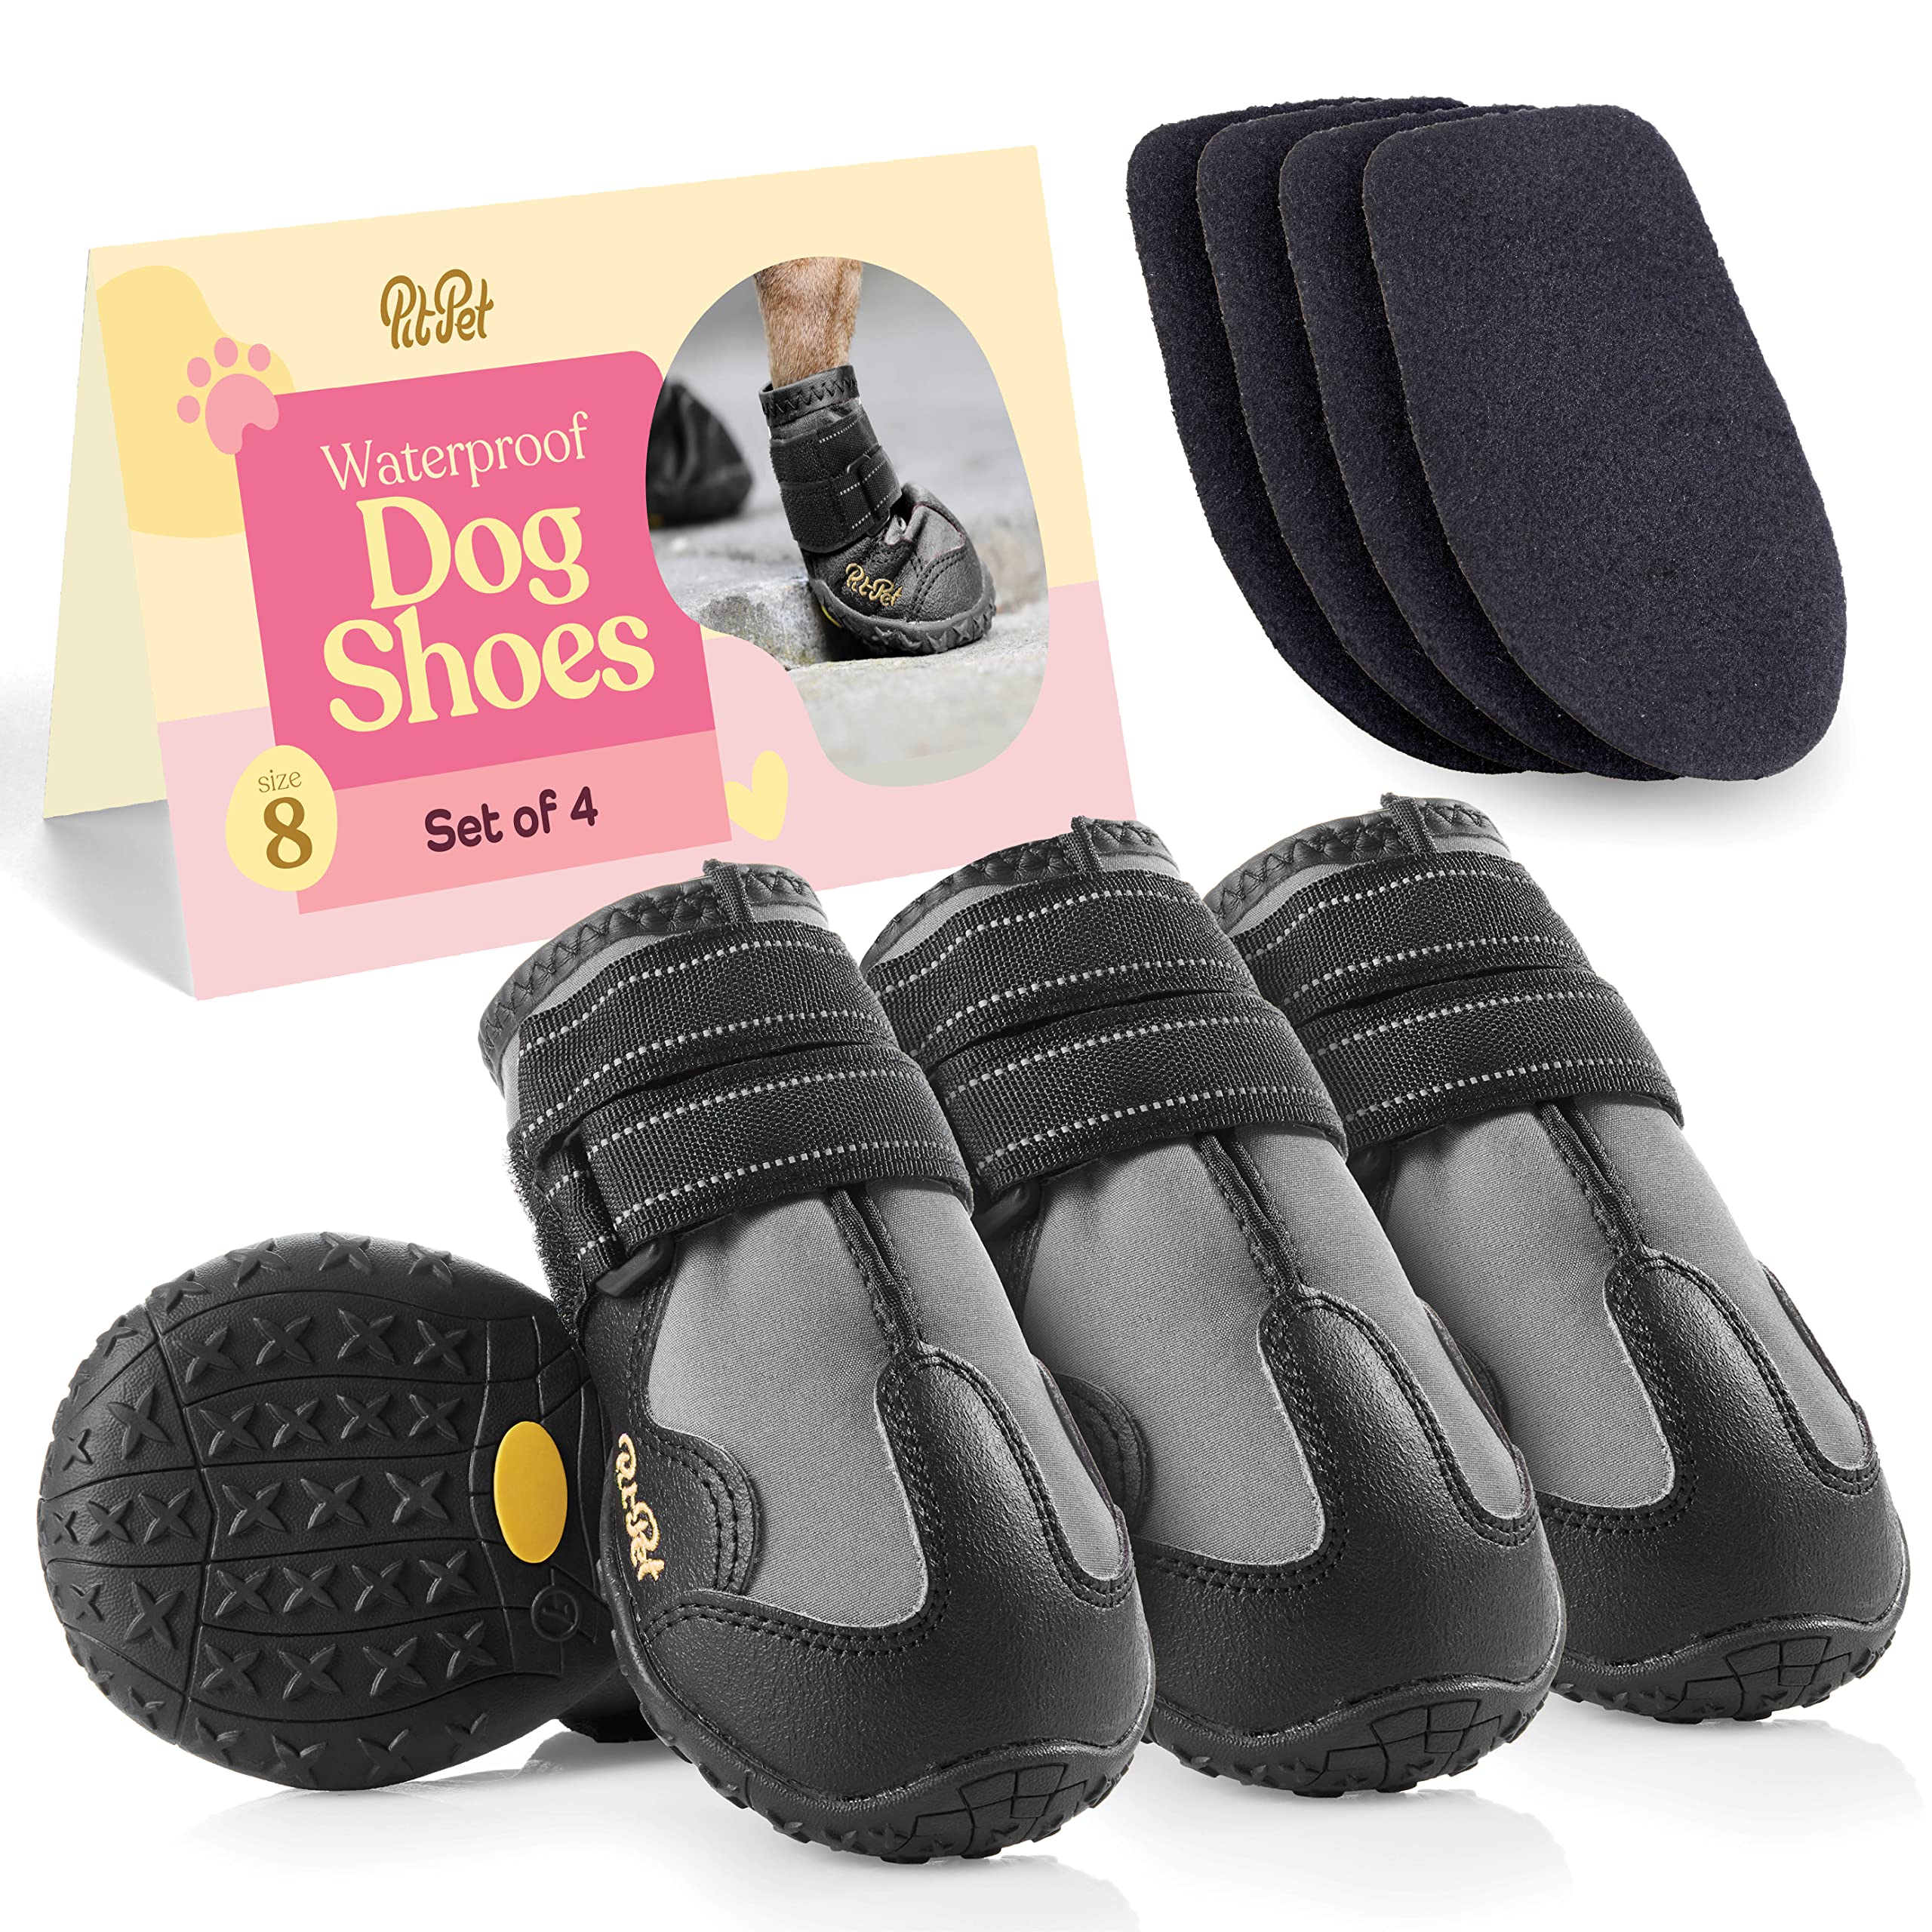 Waterproof Dog Shoes - Stylish Designed Shoes for Dogs - Dog Boots with Non-Slip Rubber Bottom Protects Paw from Hot or Cold Pavement, Dog Booties with Reflective Straps for Dogs Safety, Puppy Shoes.